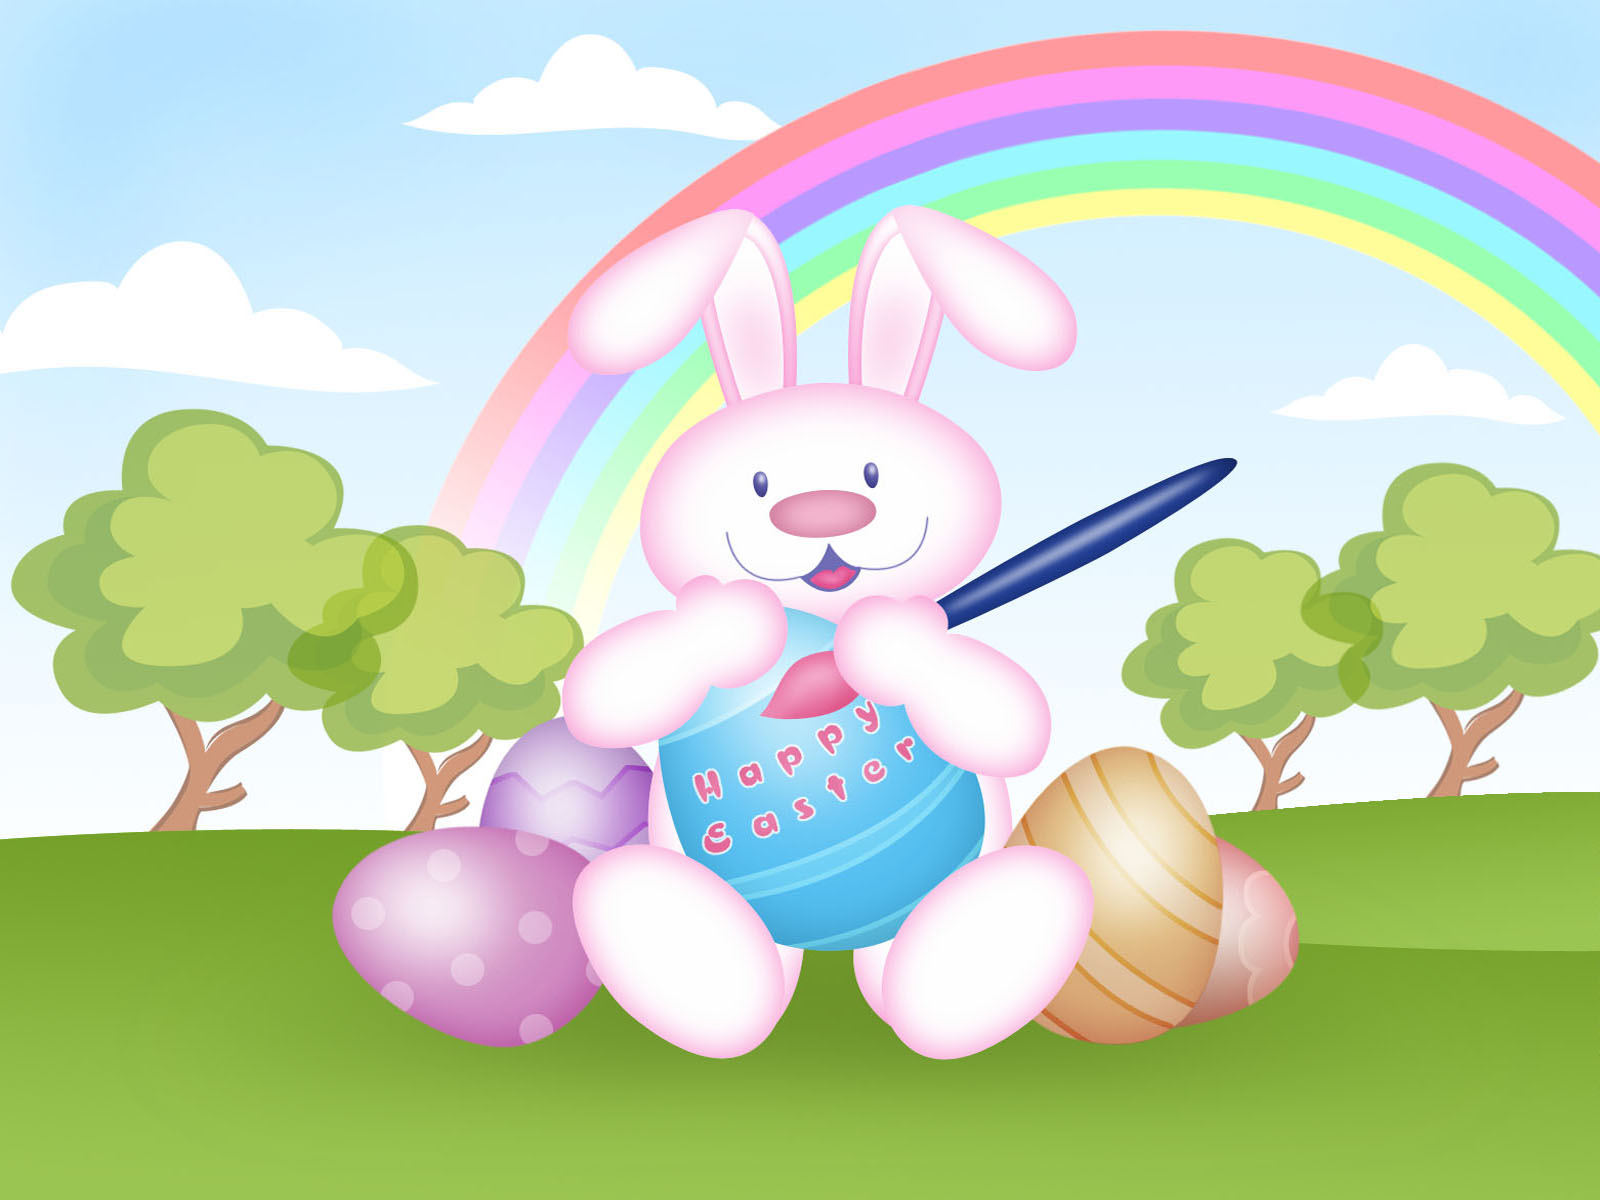 animated wallpaper easter holidays - www.